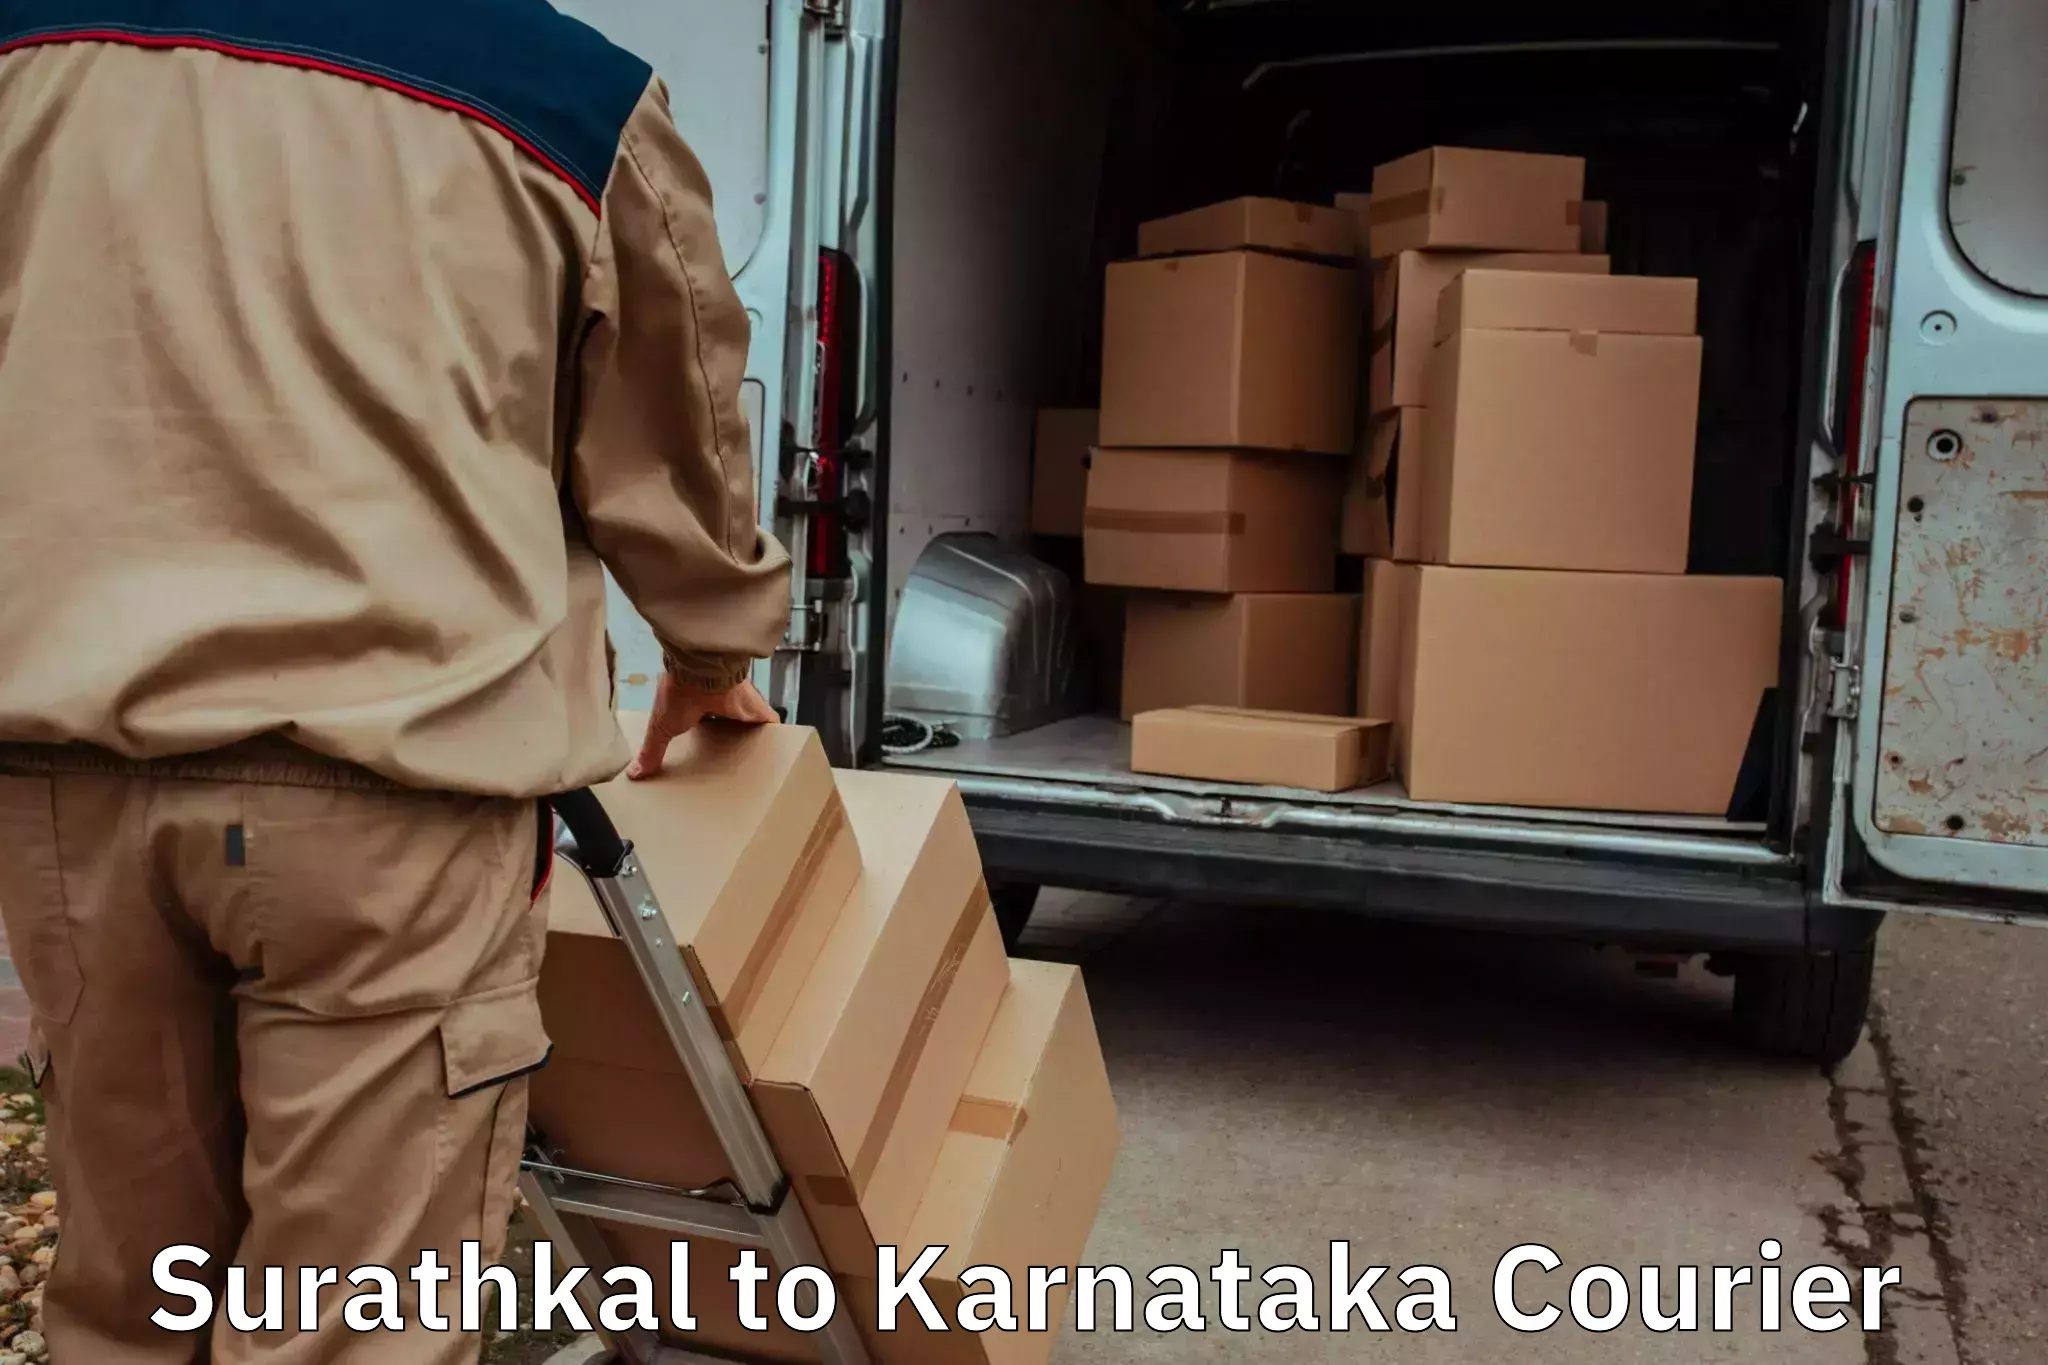 Trusted moving company Surathkal to Harohalli